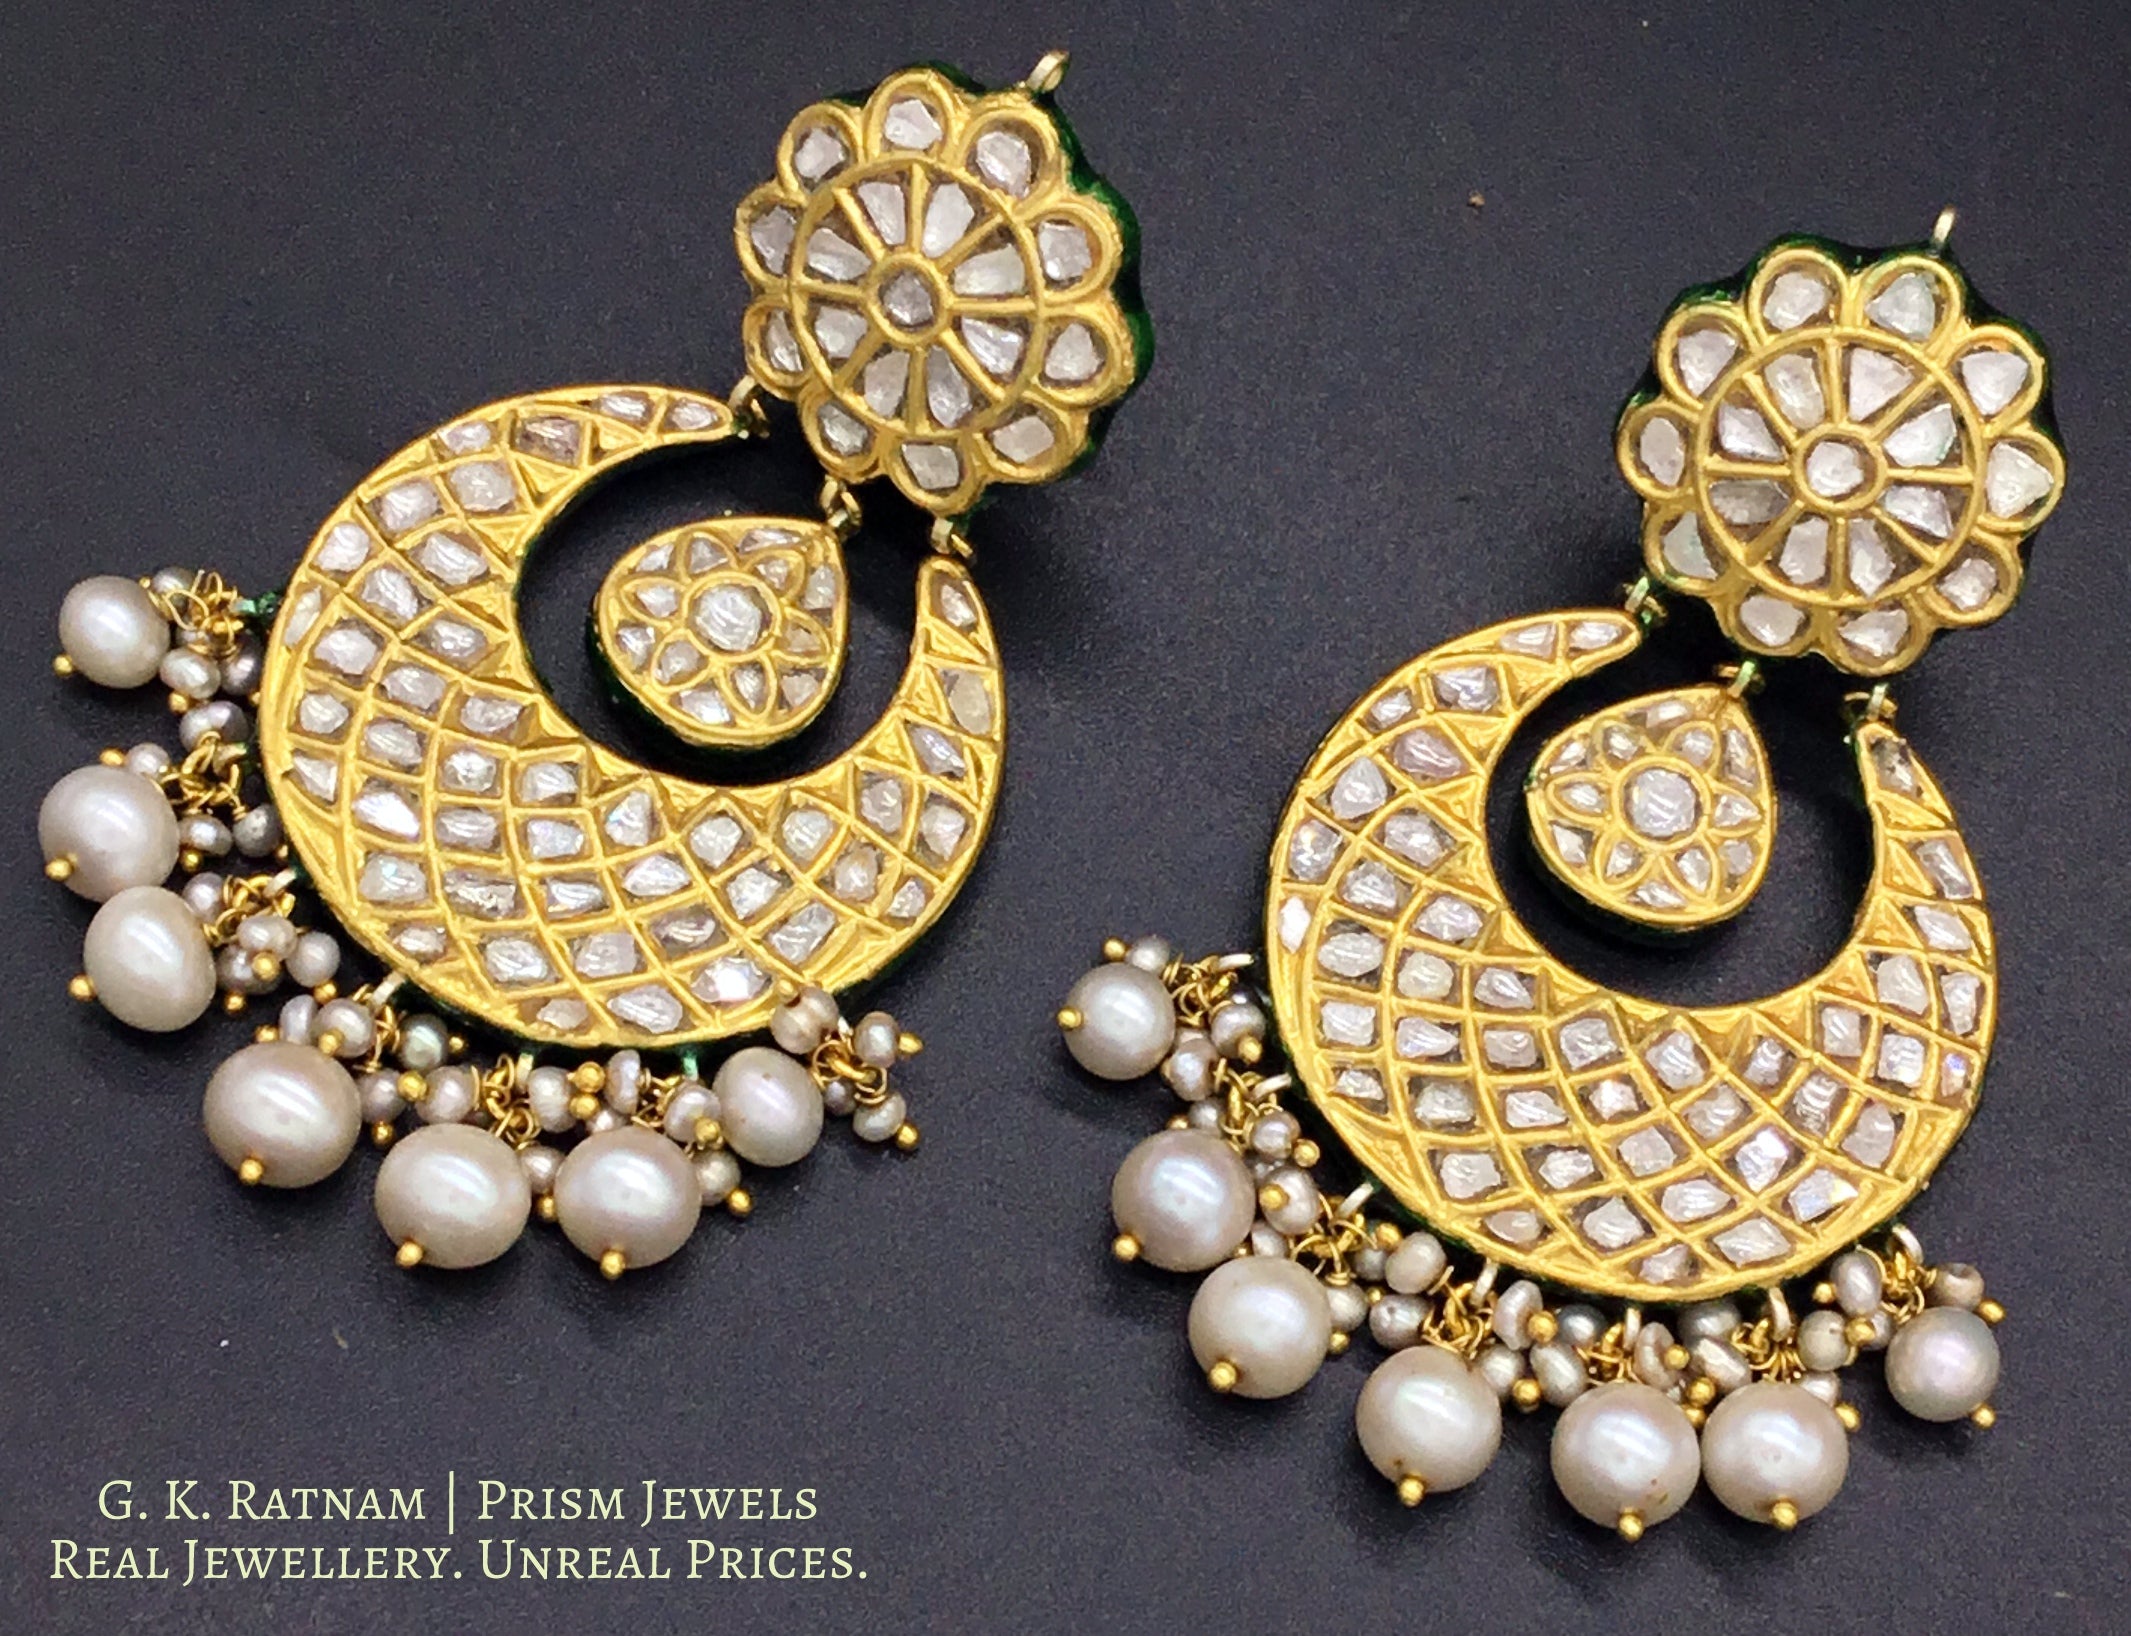 23k Gold and Diamond Polki Chand Bali Earring Pair with triple-coated shell pearls - G. K. Ratnam